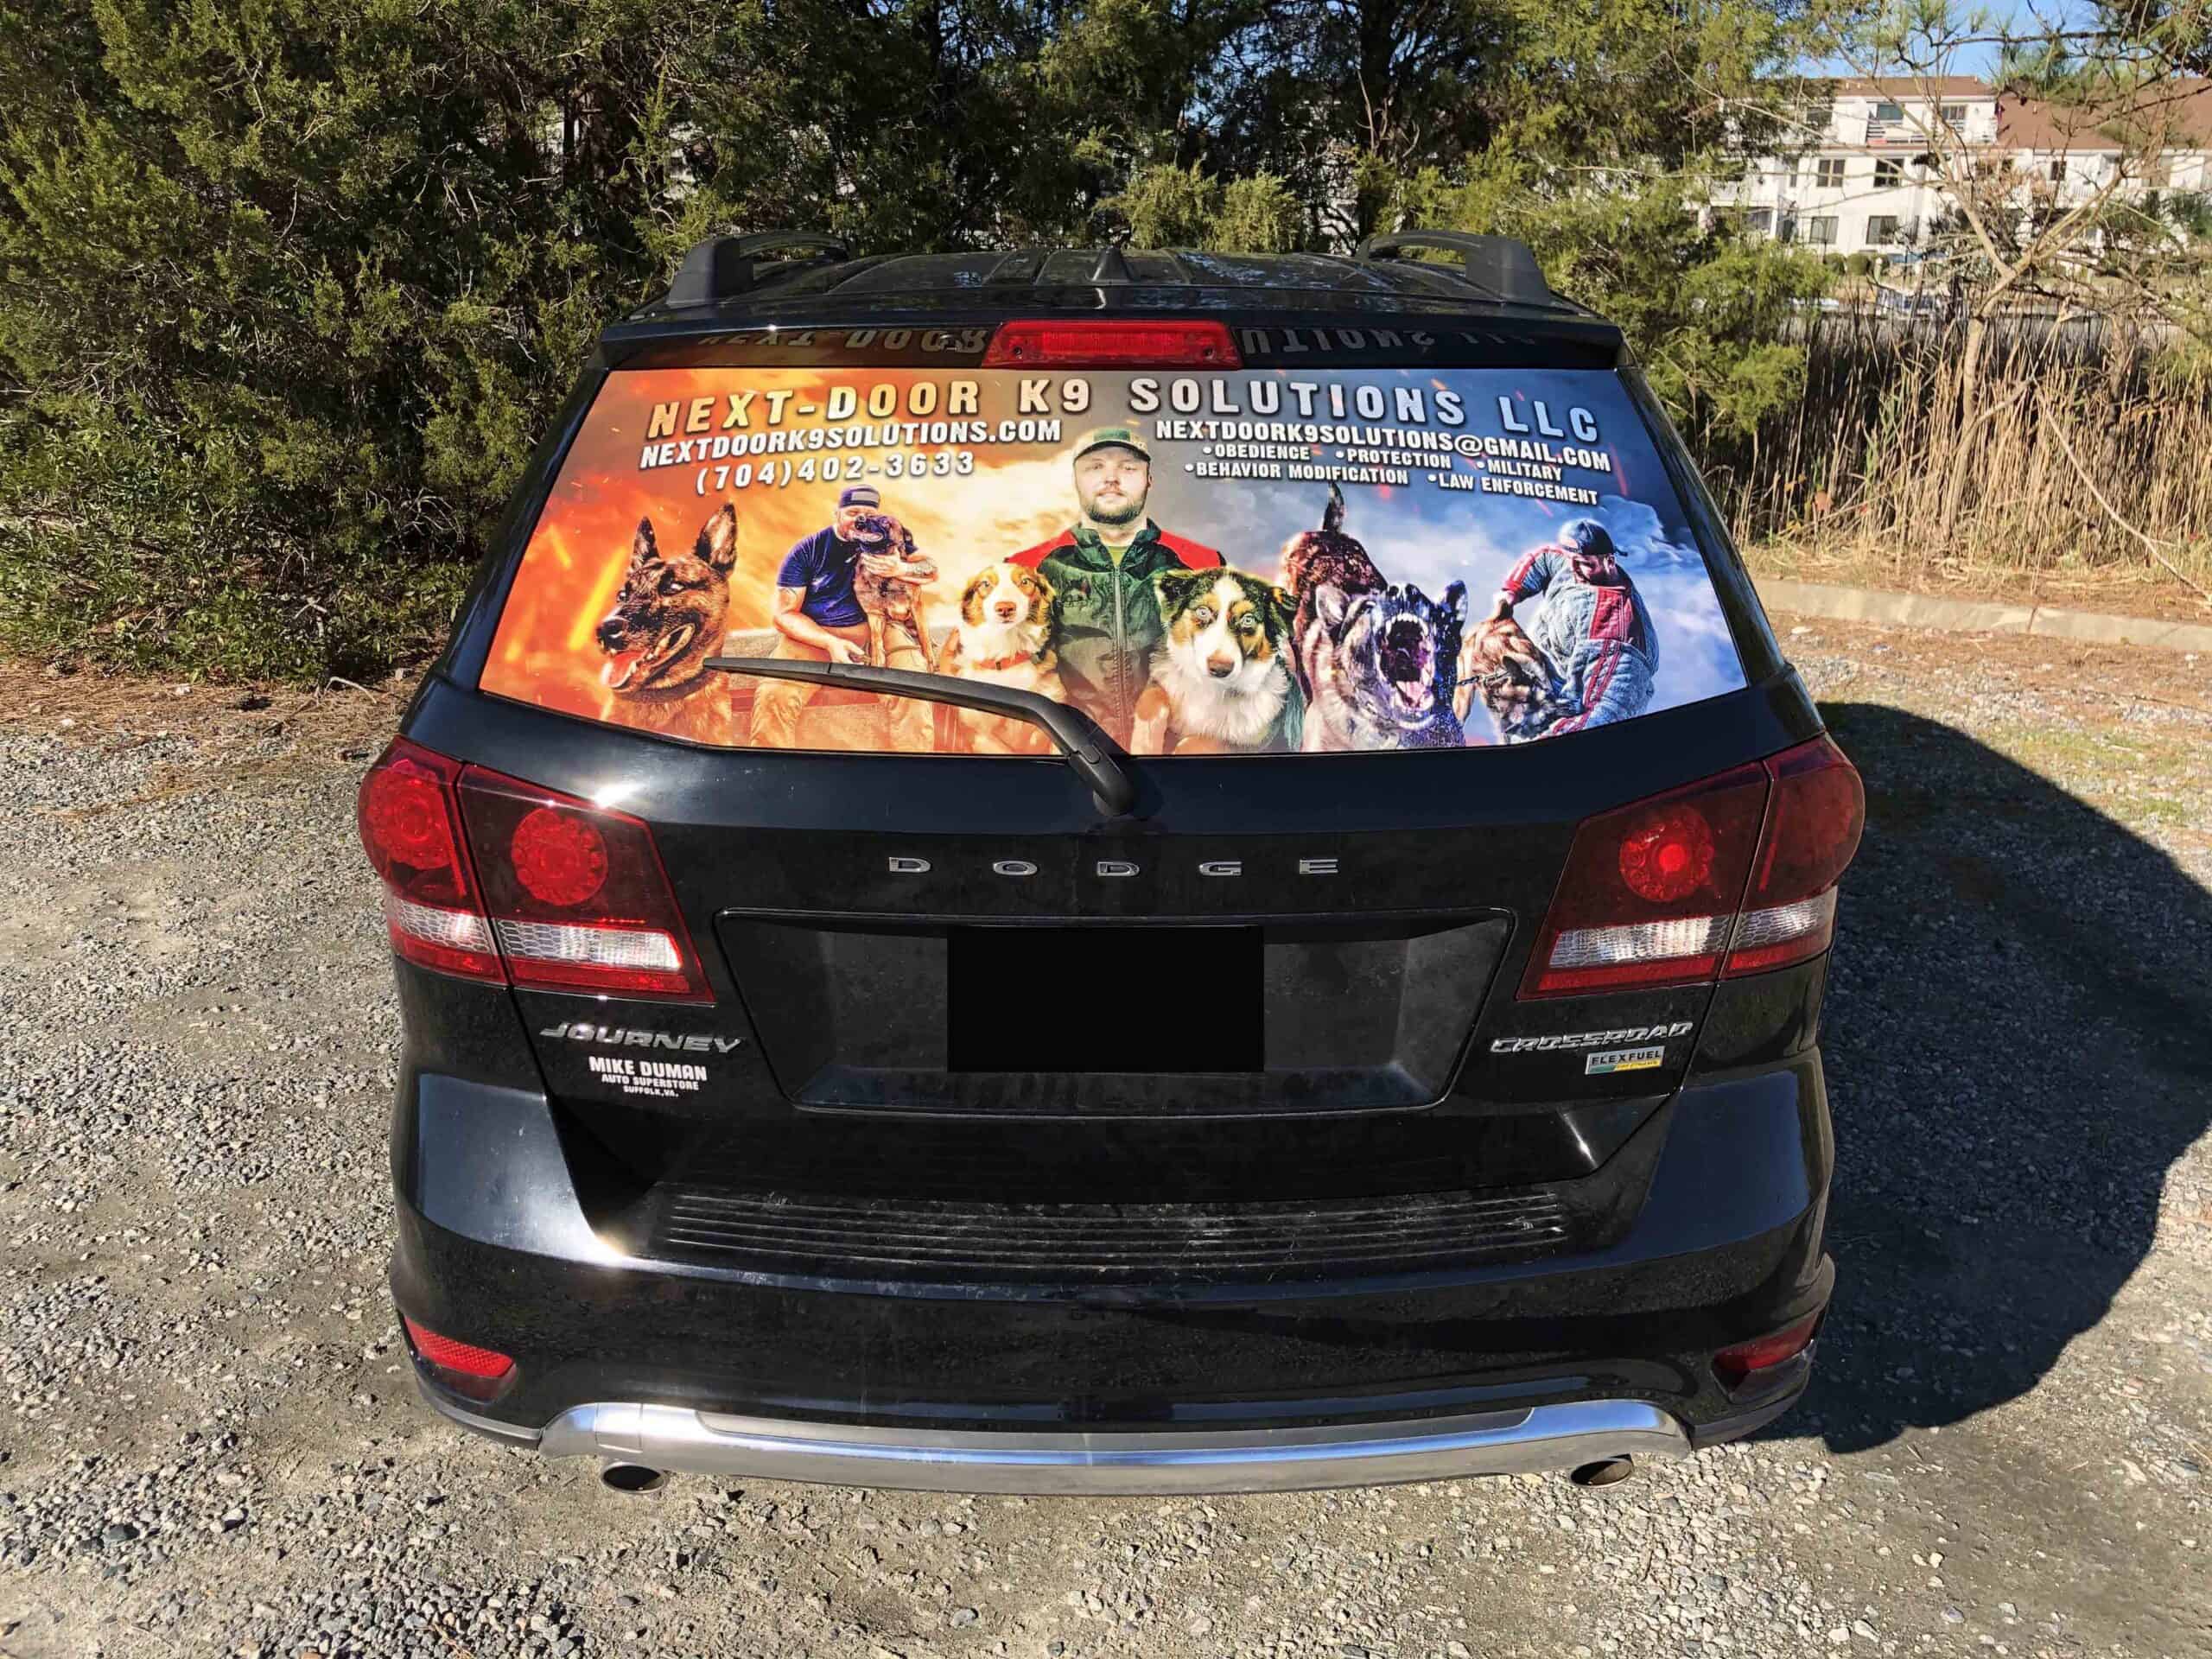 See-through rear window graphics and art for car or trucks from DeSigns, Inc.